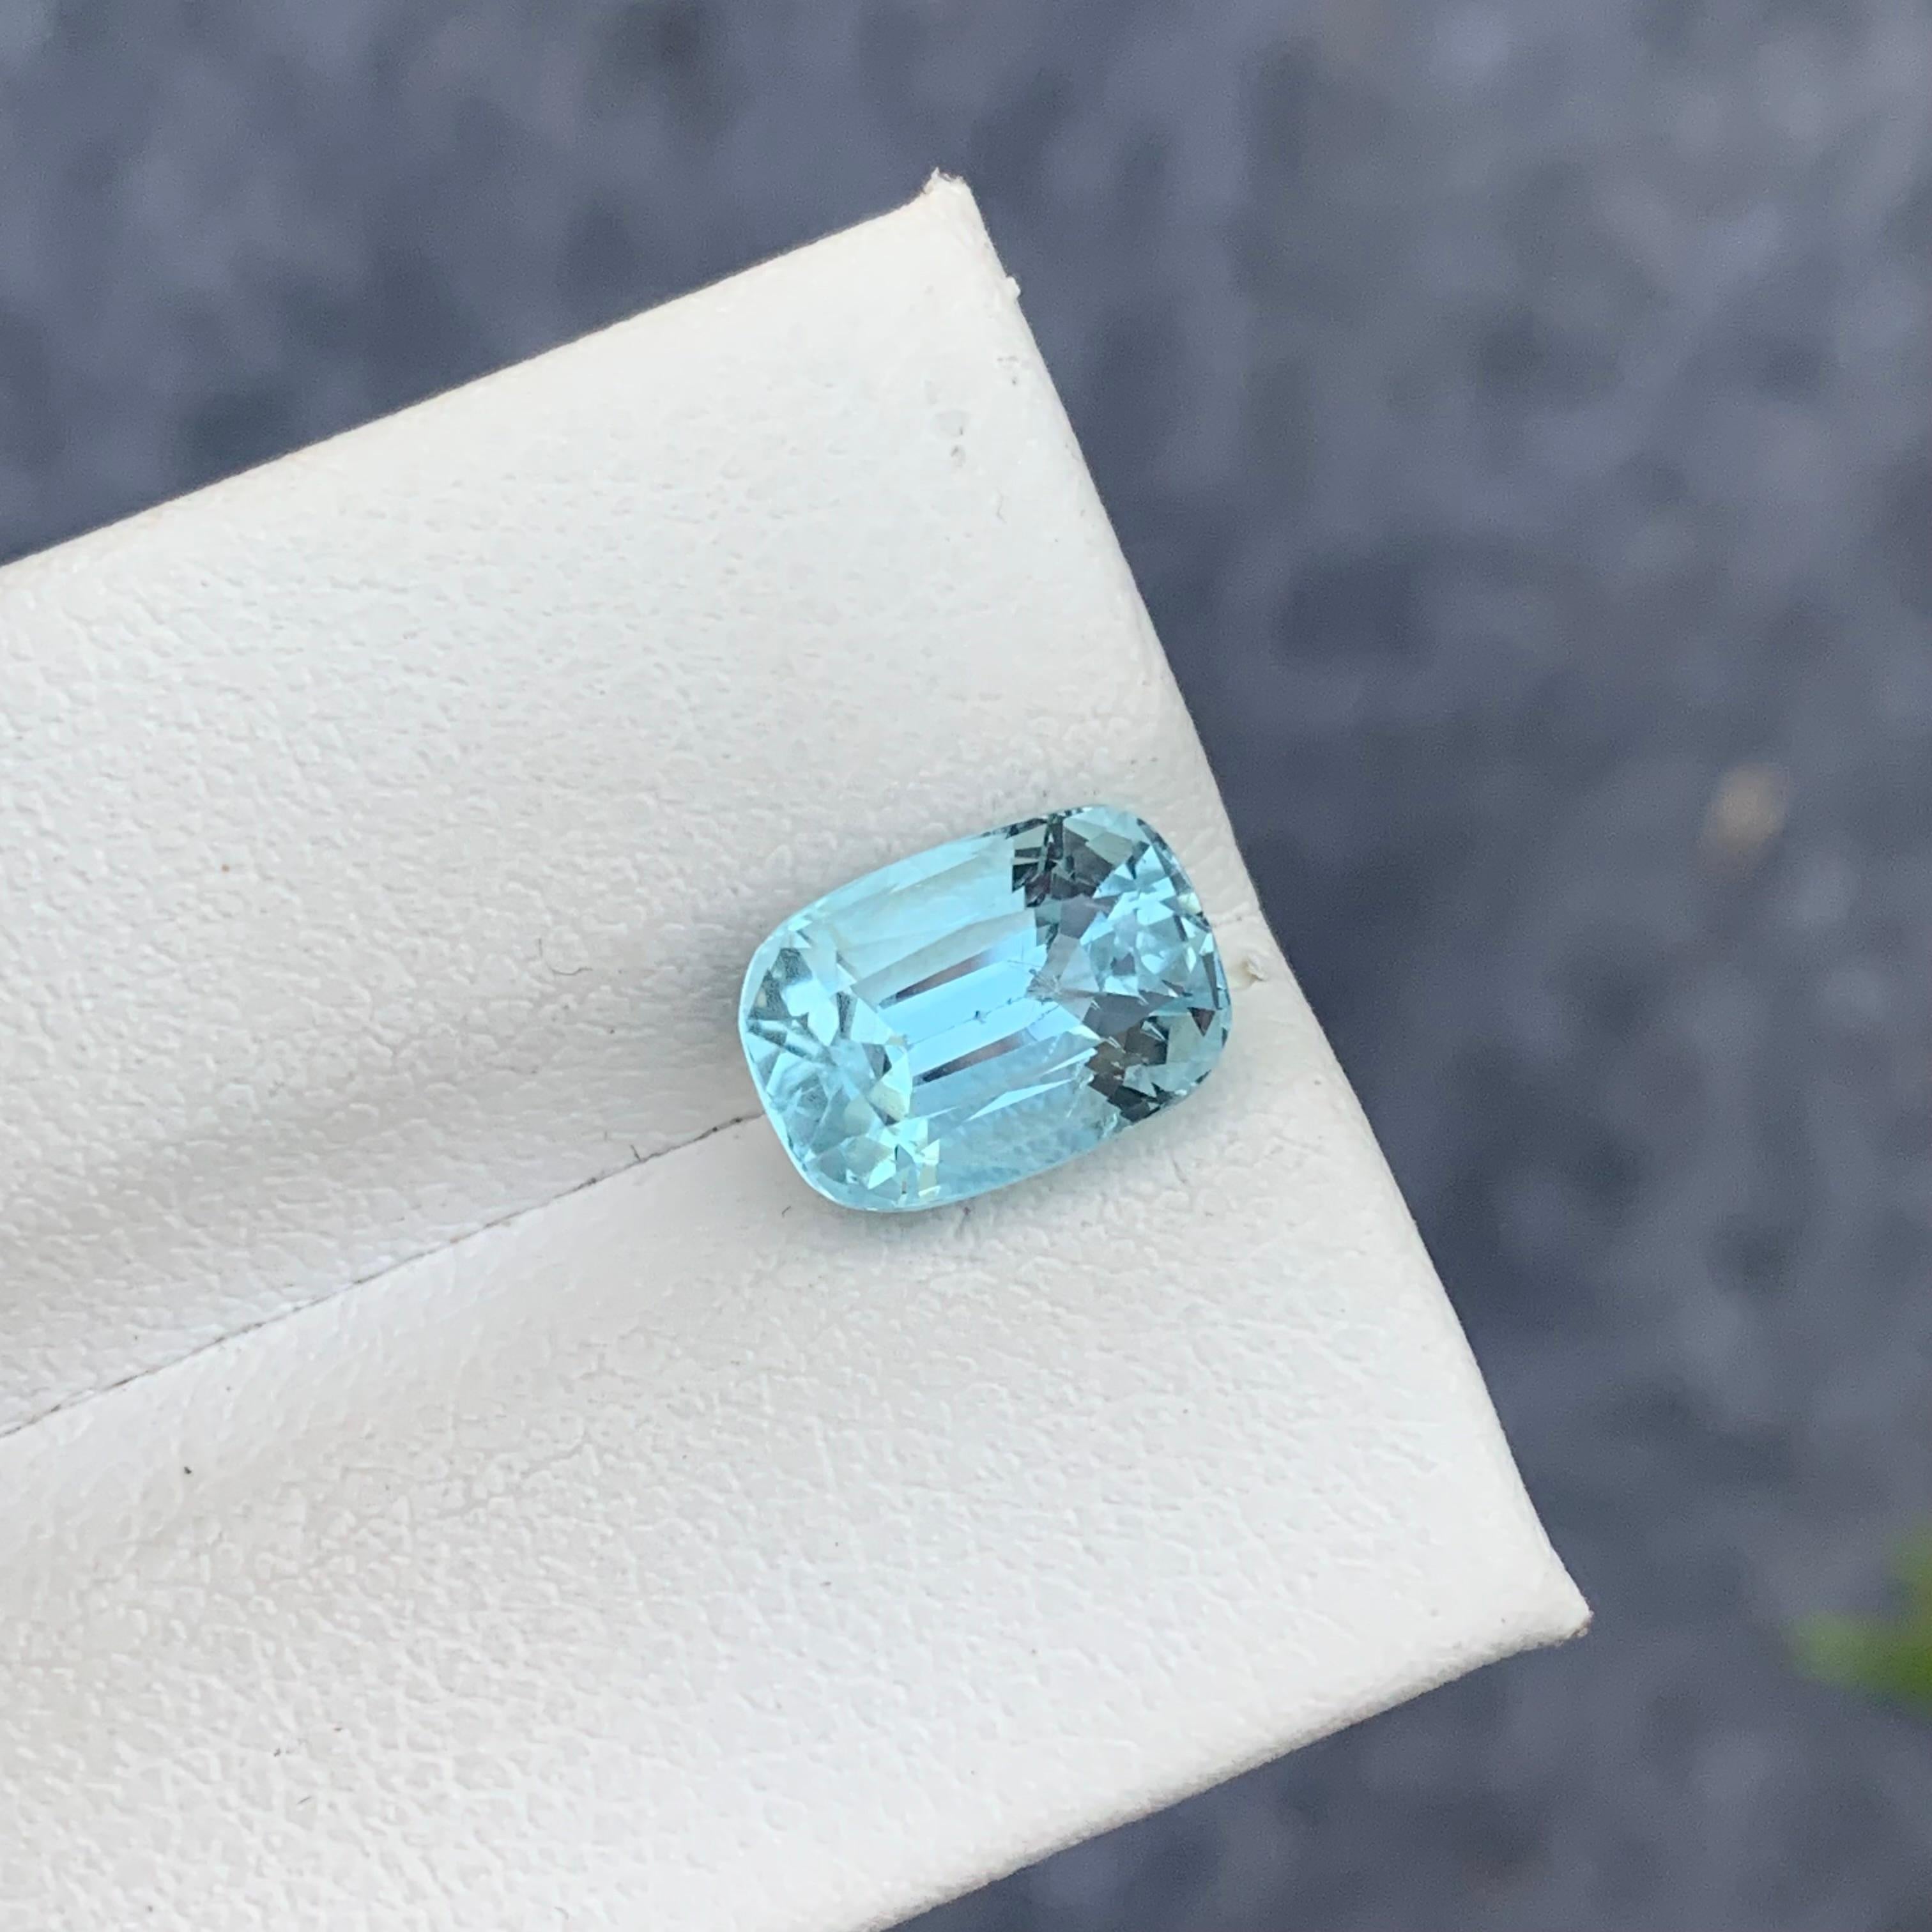 Gemstone Type : Aquamarine
Weight : 2.55 Carats
Dimensions : 9.6x6.9x6 mm
Clarity : Eye Clean
Origin : Pakistan
Shape: Long Cushion
Color: Light Blue
Certificate: On Demand
Birthstone Month: March
It has a shielding effect on your energy field and